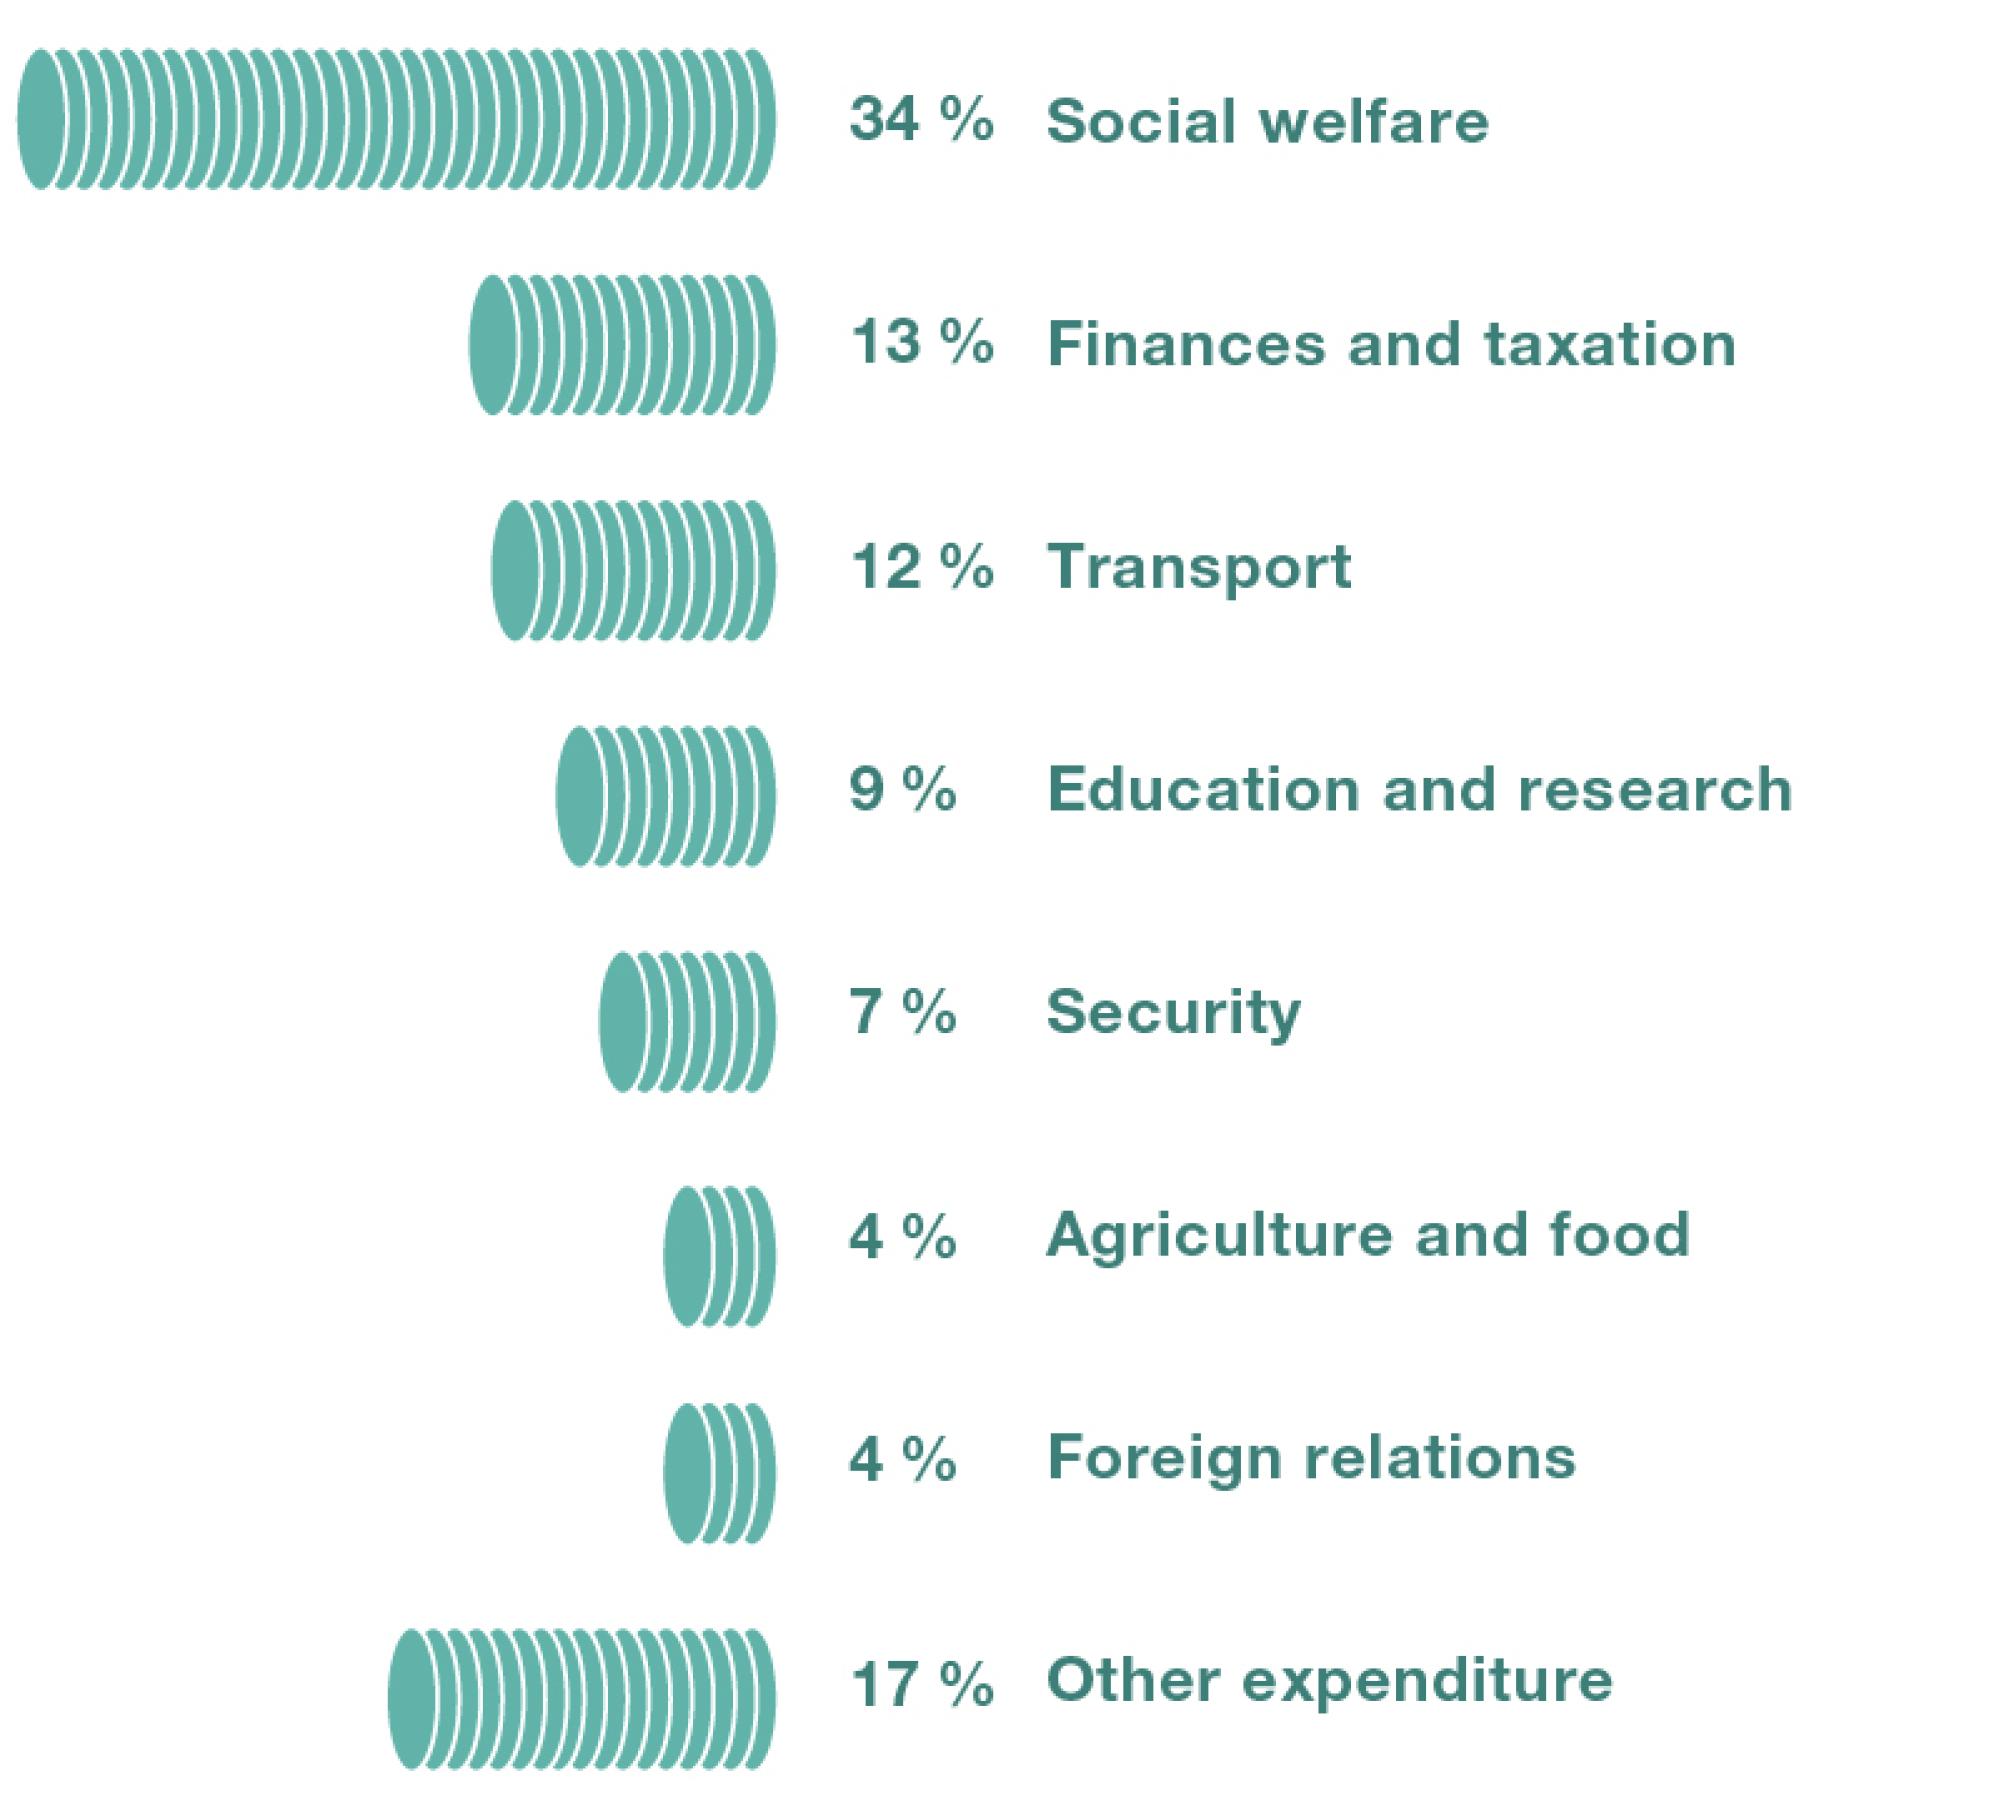 Federal expenditure in 2021 was divided up as follows Social welfare: 34% Finances and taxation: 13% Transport: 12% Education and research: 9% Security: 7% Agriculture and food: 4% Foreign relations: 4% And other expenditure: 17%.